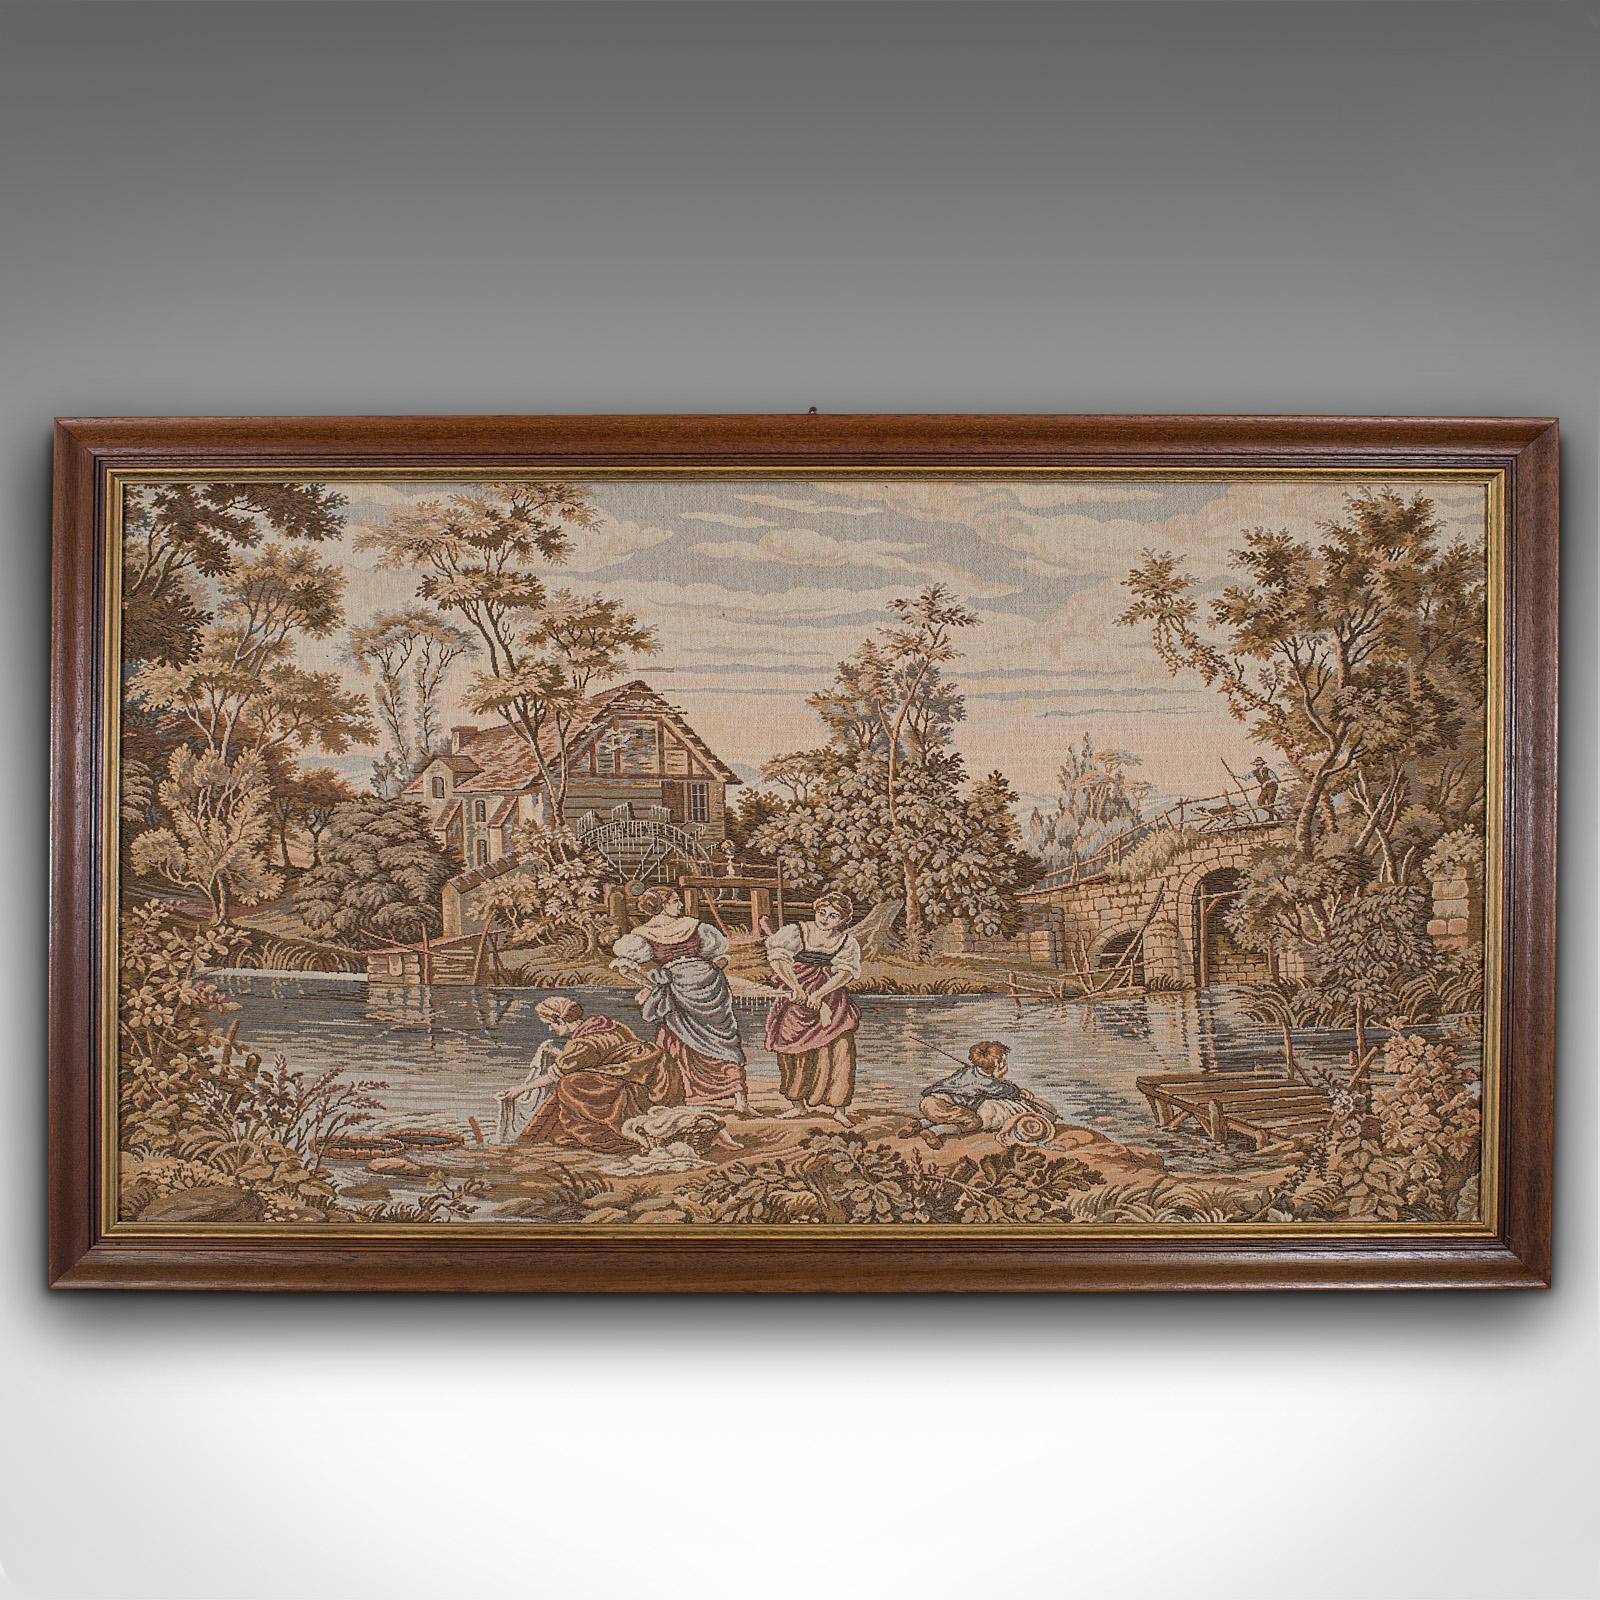 This is a vintage panoramic tapestry. A French, needlepoint decorative panel with mahogany frame, dating to the early 20th century, circa 1930.

Classical riverside appeal with charming detail
Displays a desirable aged patina